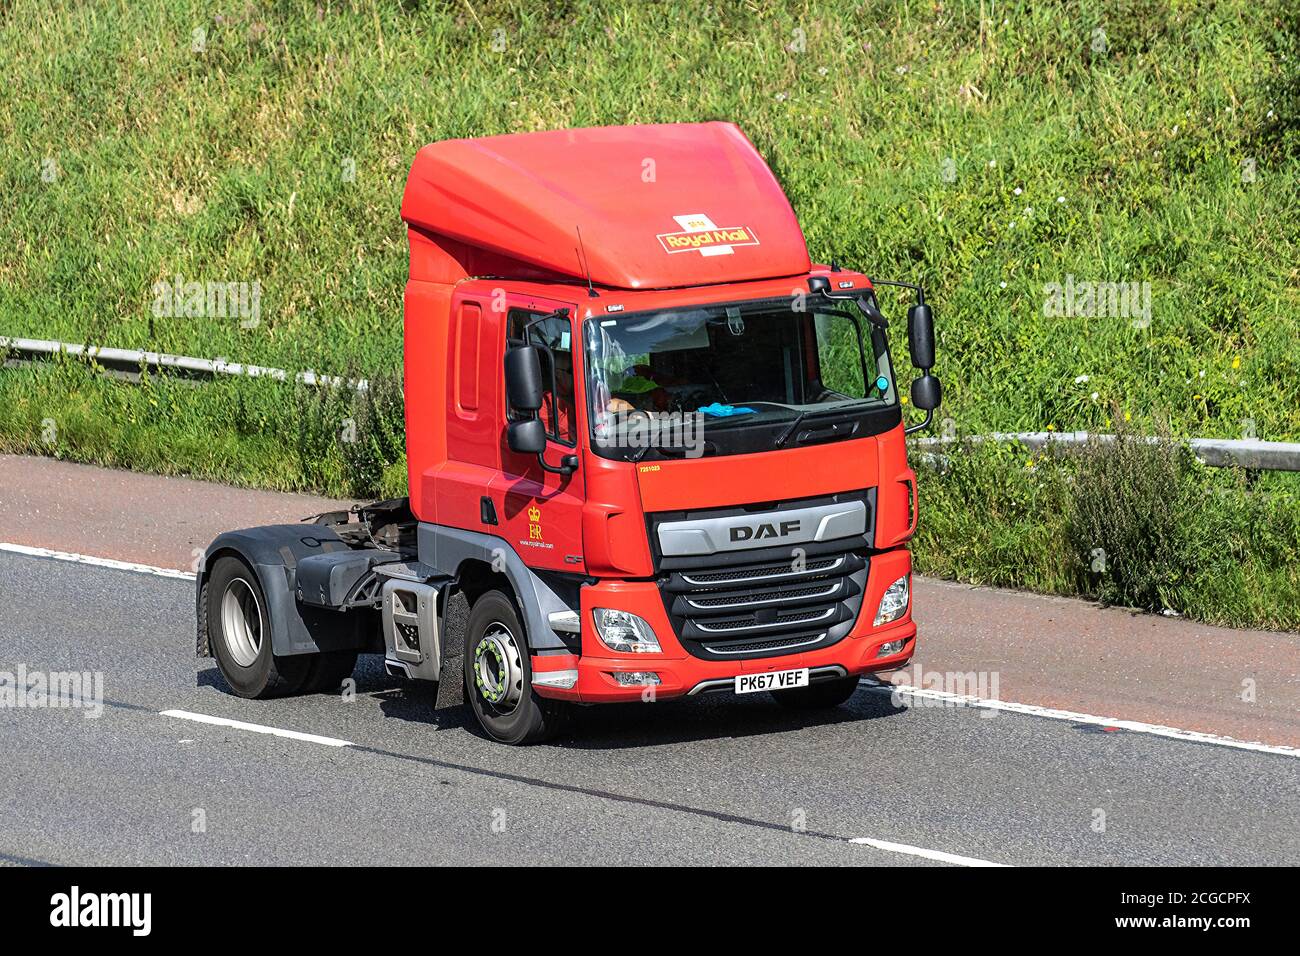 Royal mail 2017 DAF CF powertrain tractor unit; Post office Haulage delivery trucks, lorry, transportation, truck, cargo carrier, commercial vehicle,  transport industry, M61 at Manchester, UK Stock Photo